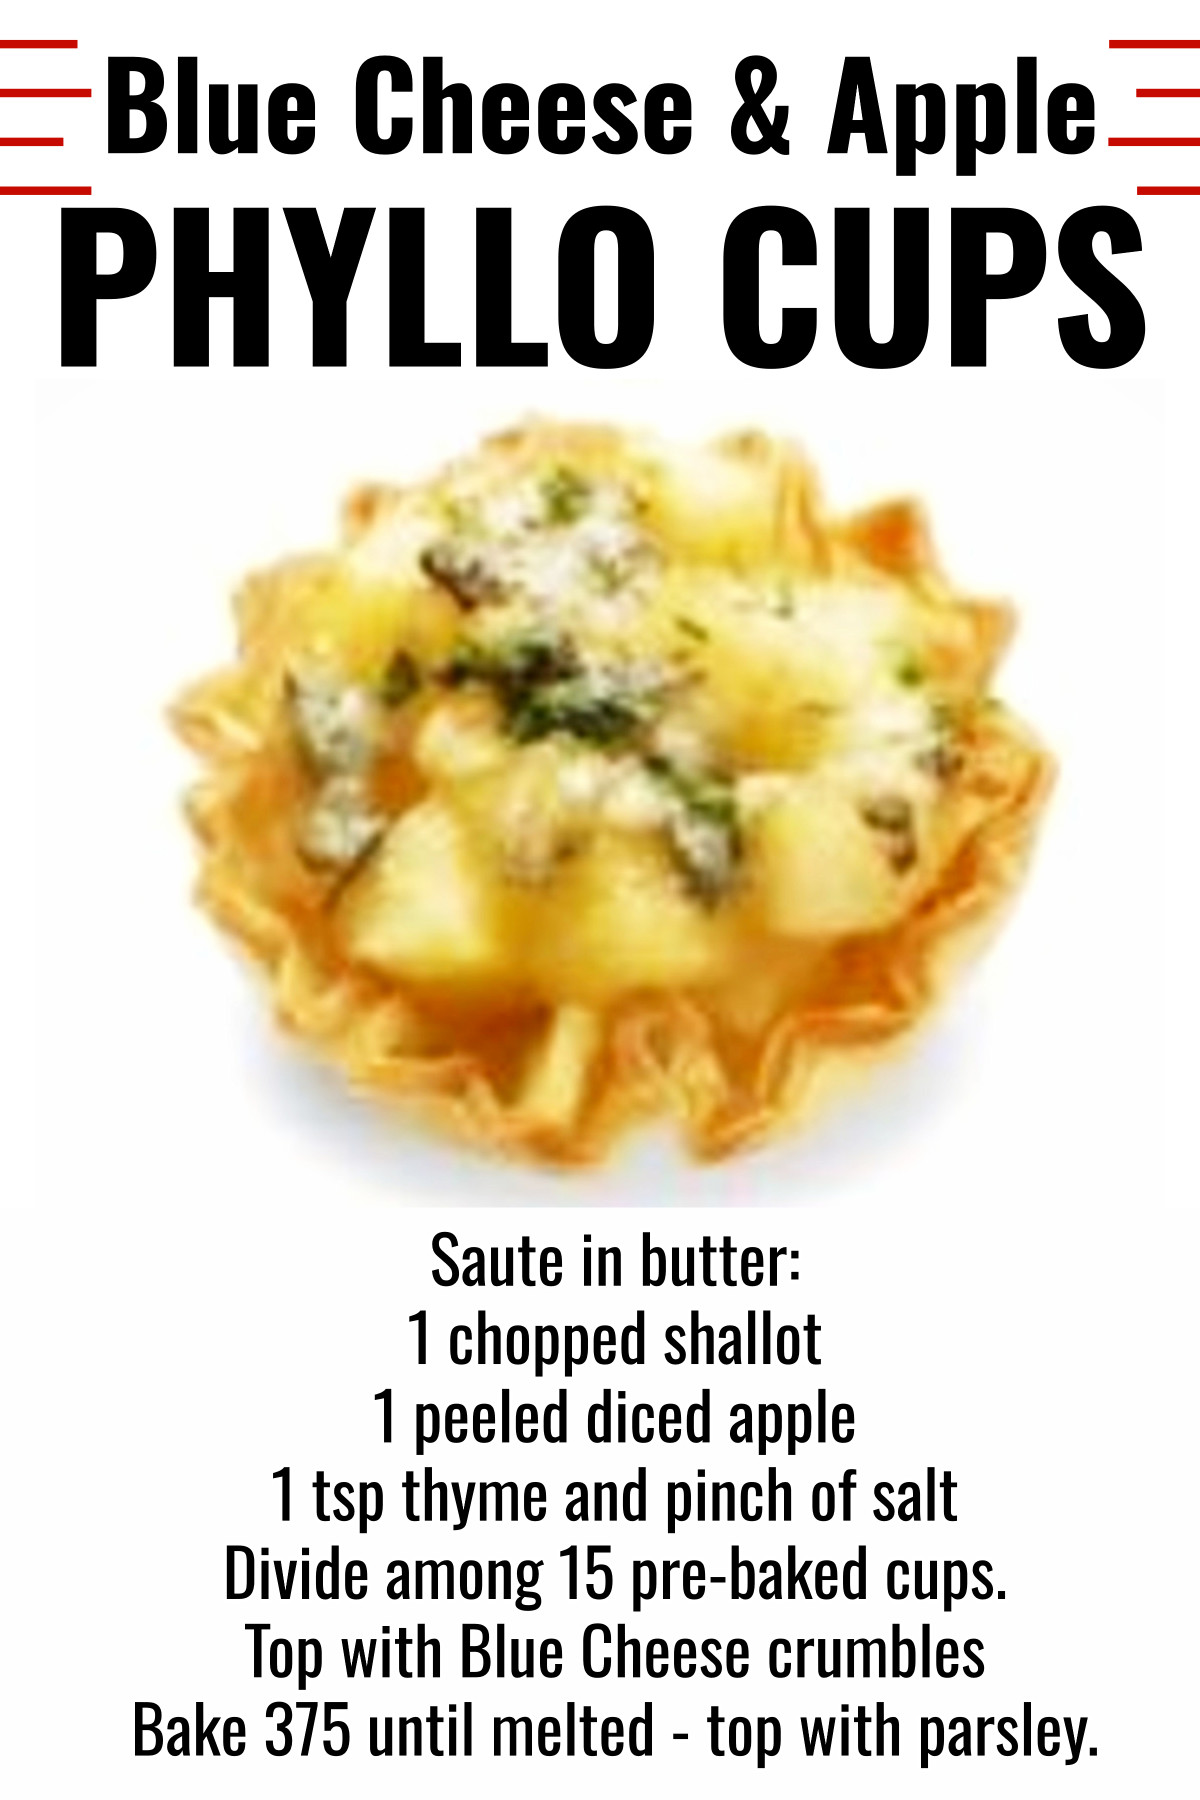 Blue Cheese & Apple Phyllo Cups